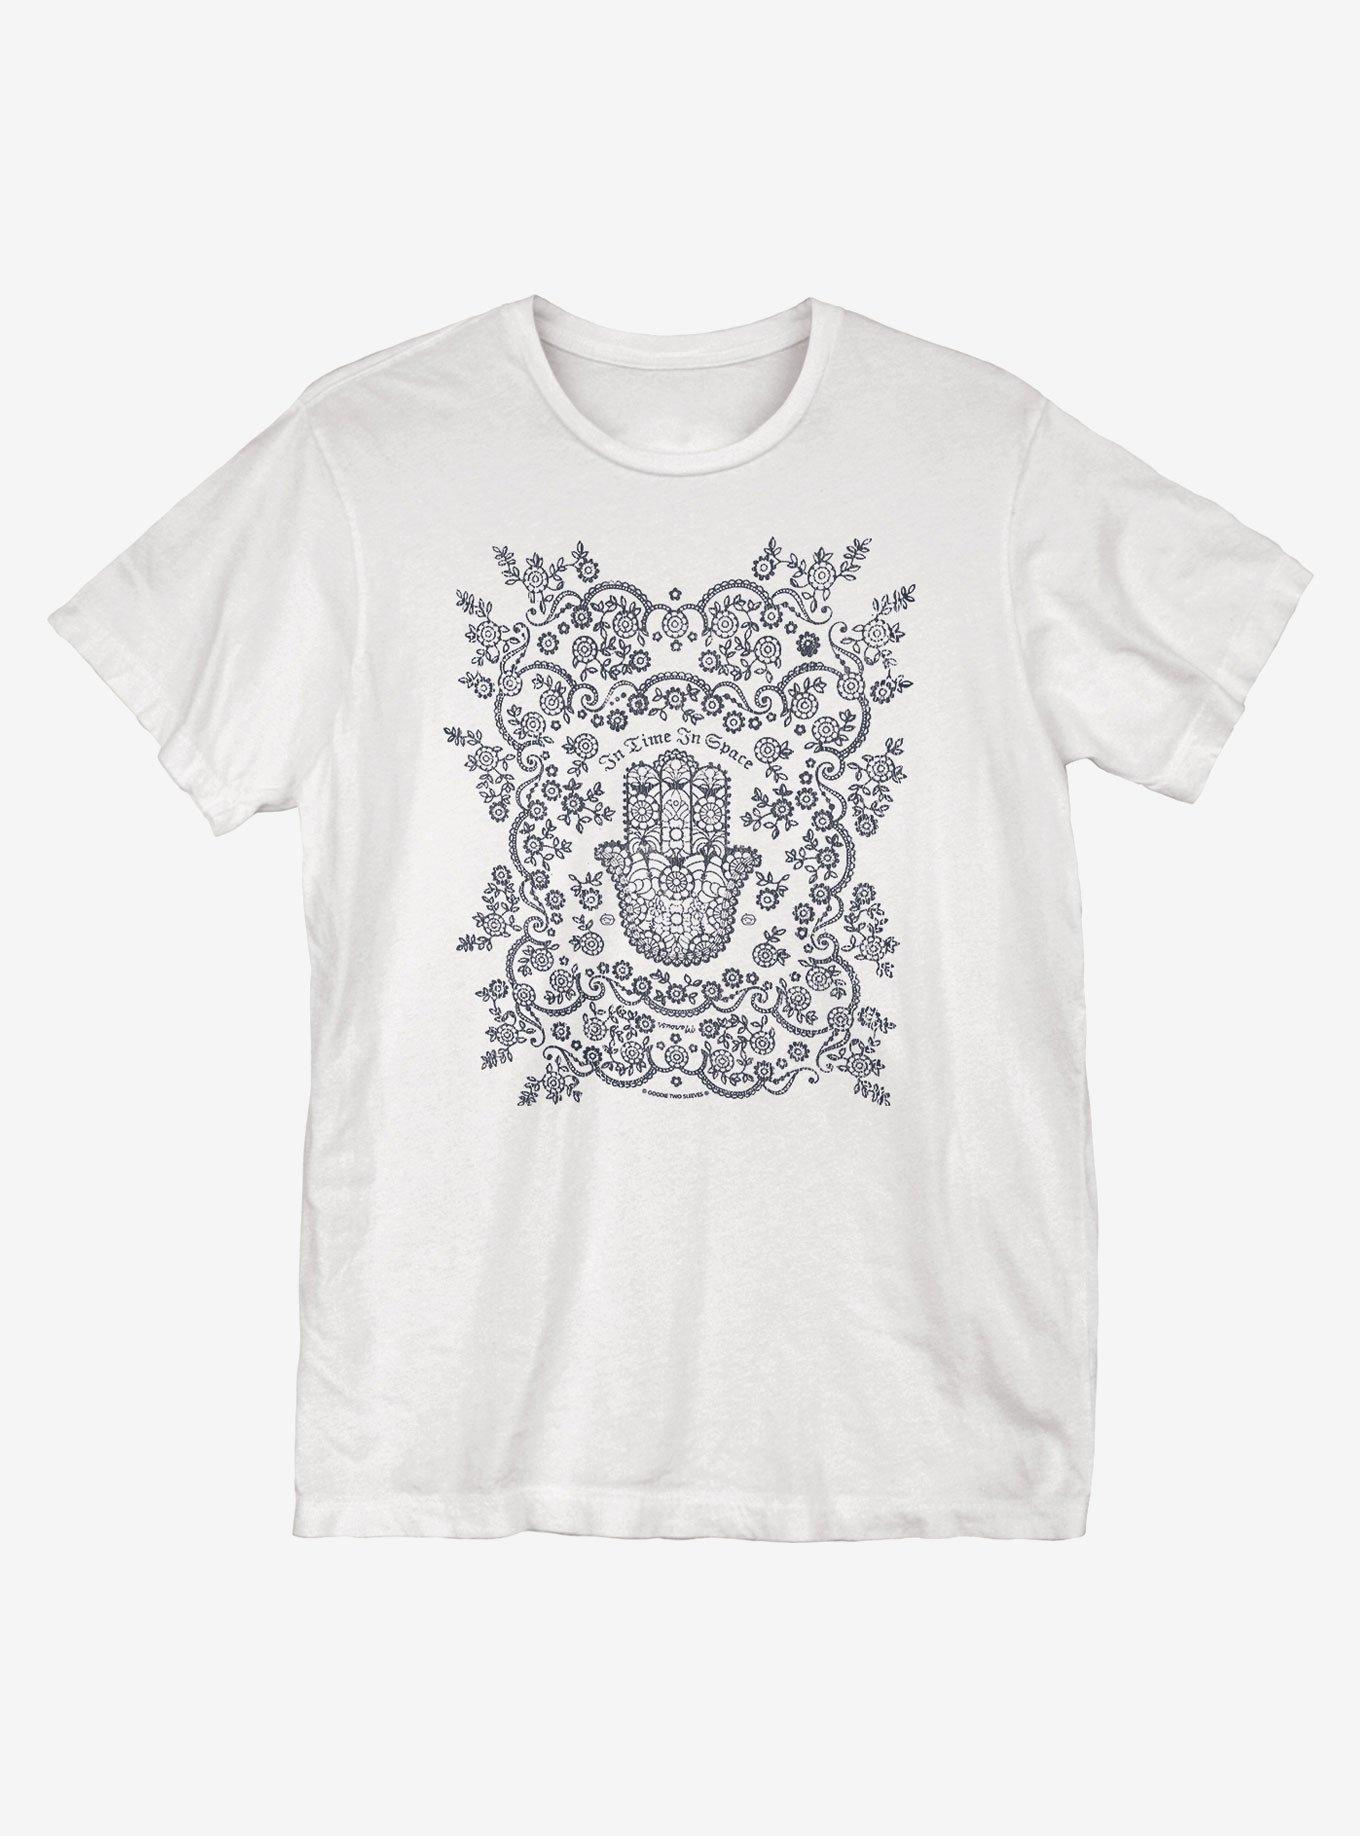 Hand of Fate T-Shirt, WHITE, hi-res